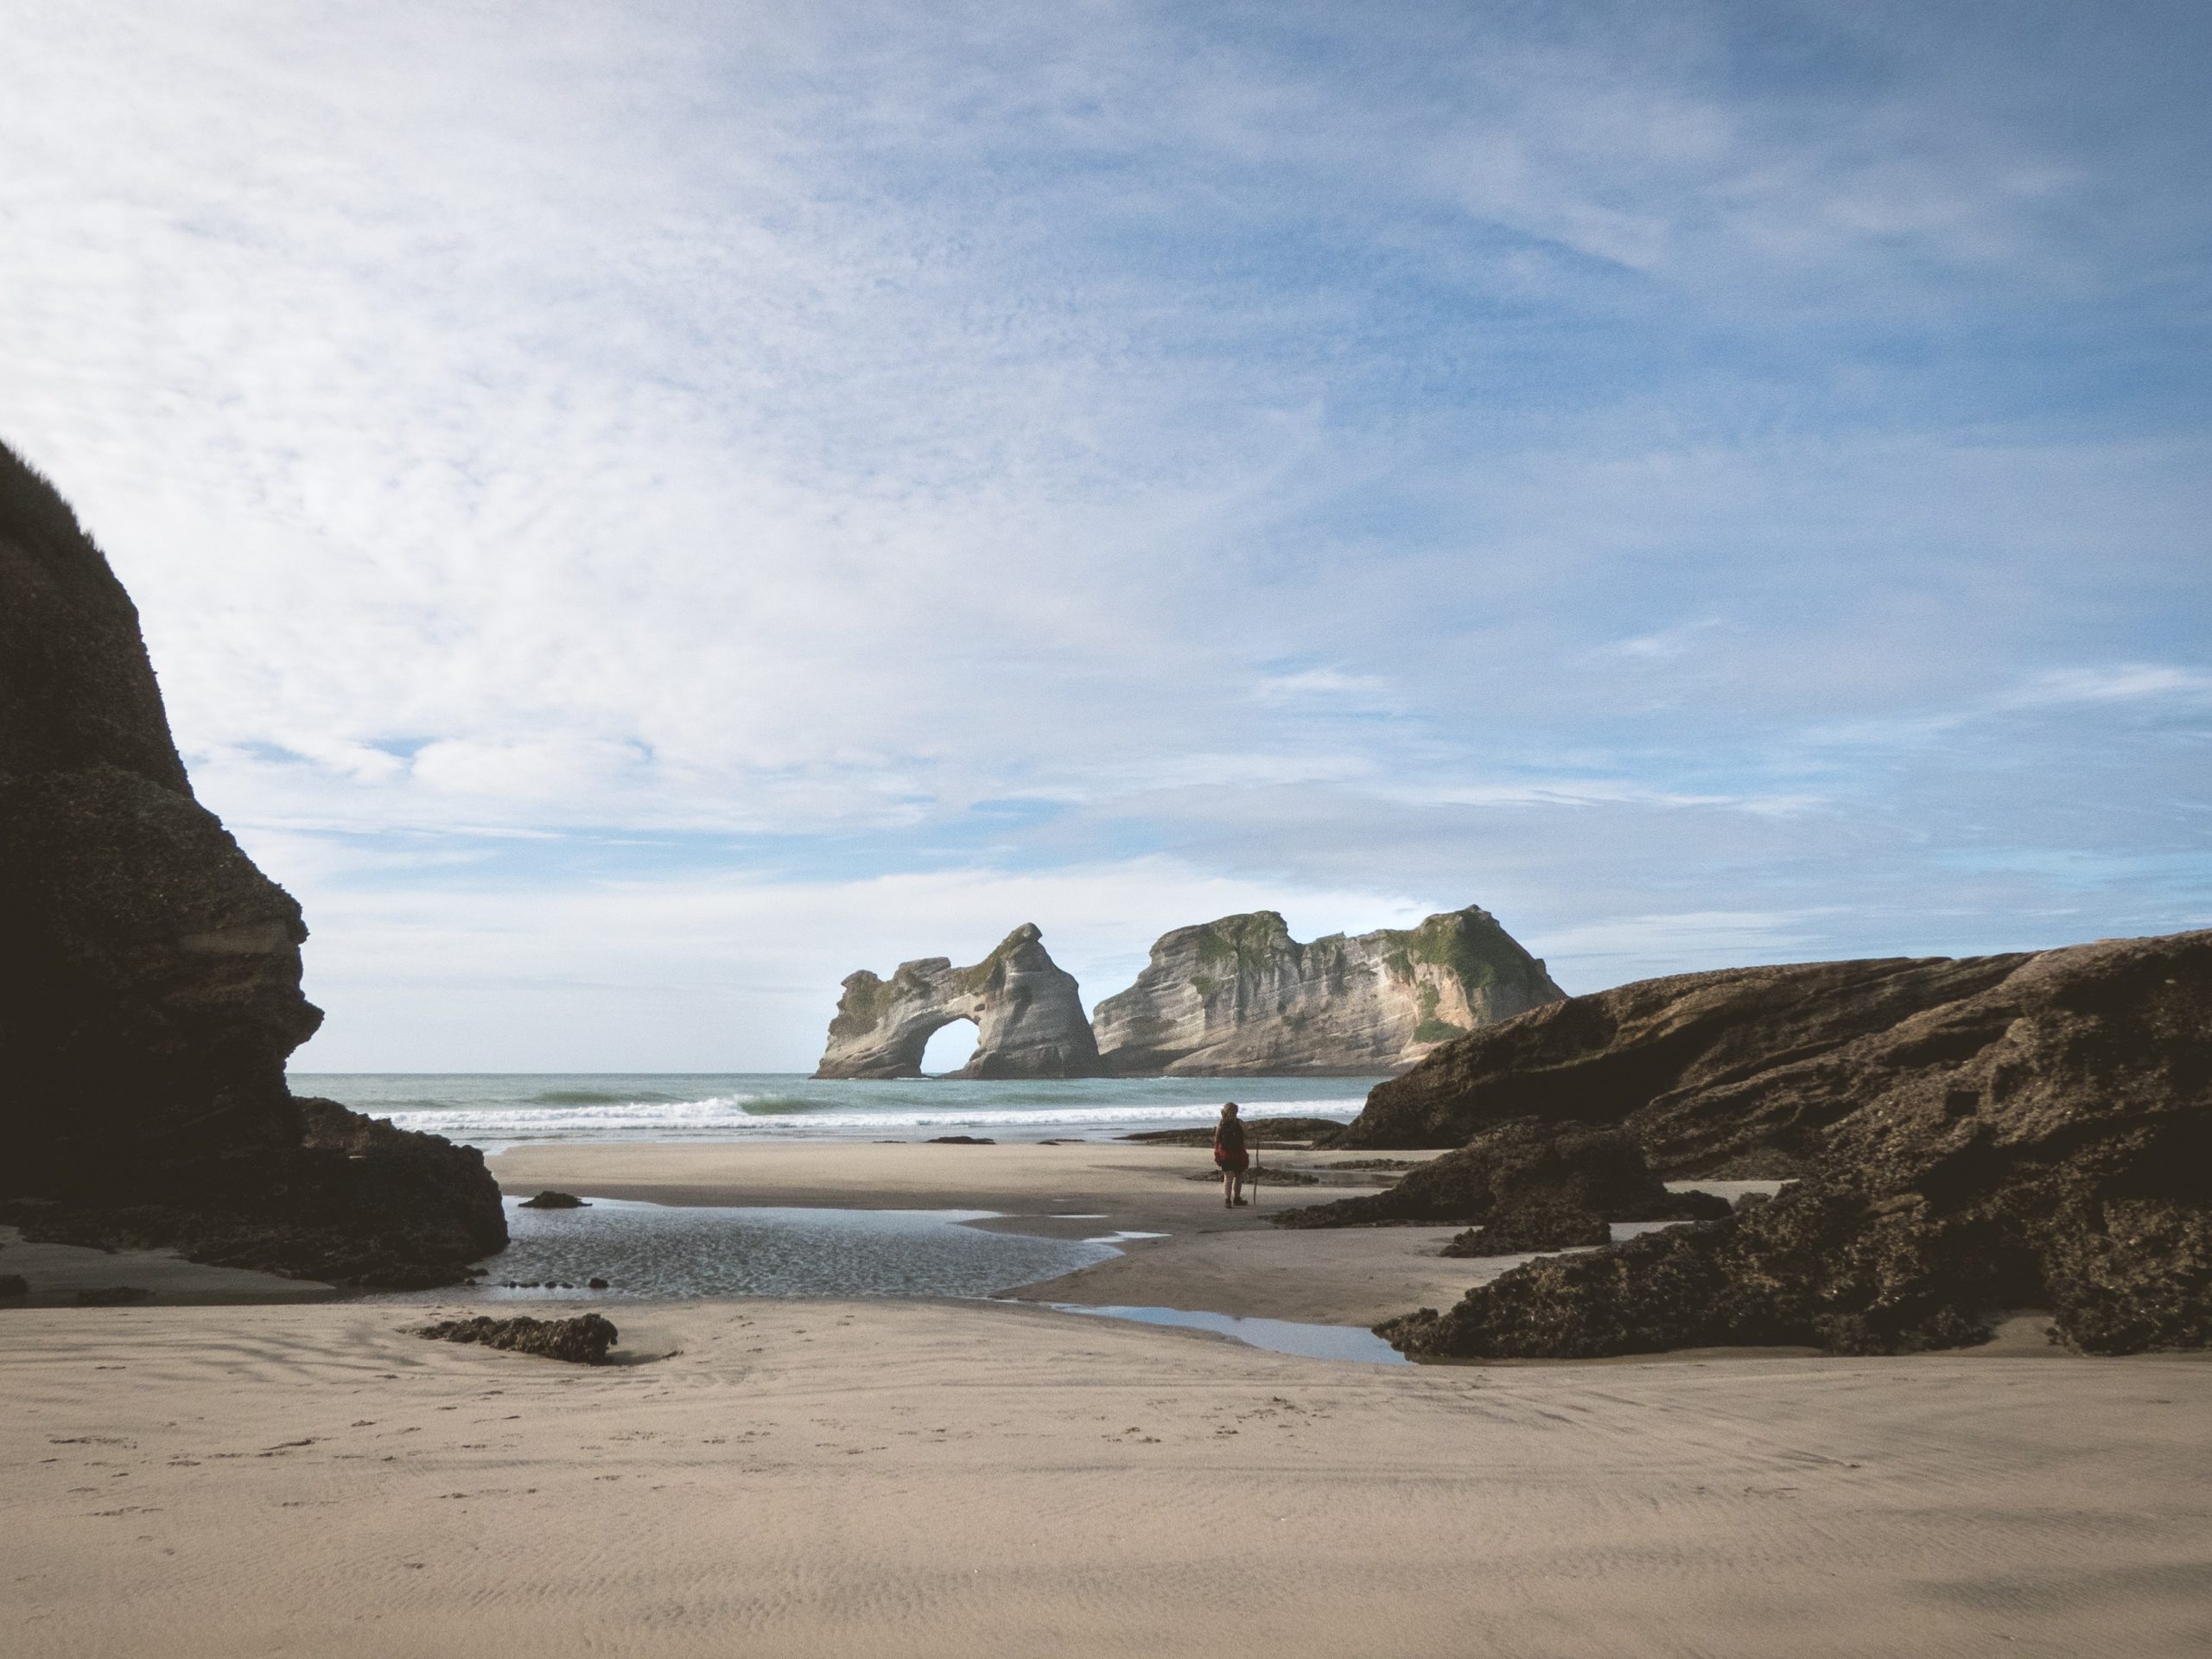 A sandy beach with large black rocks and a natural rock arch island in the ocean in the distance.